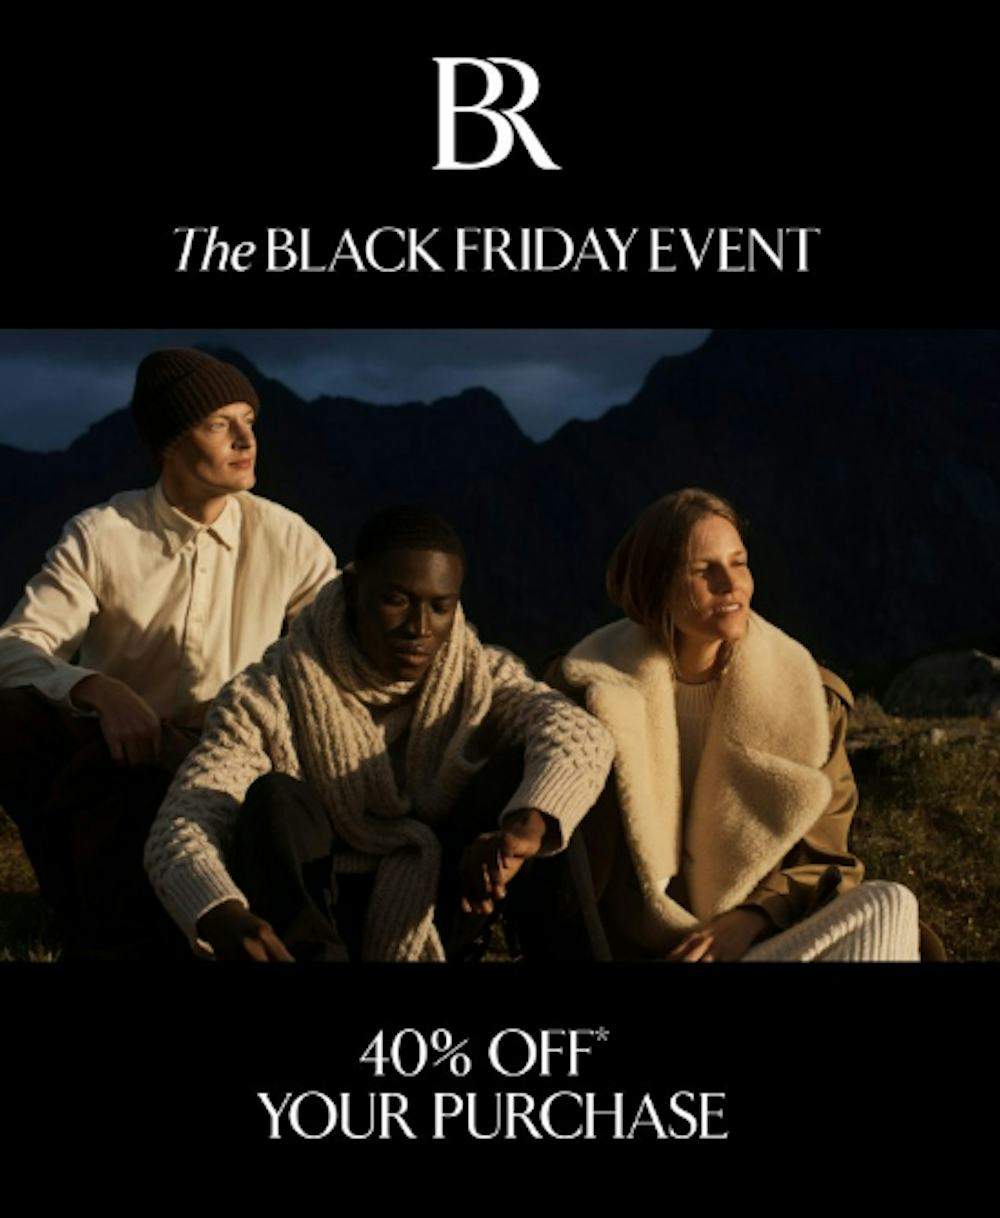 The Black Friday Event: 40% Off Your Purchase